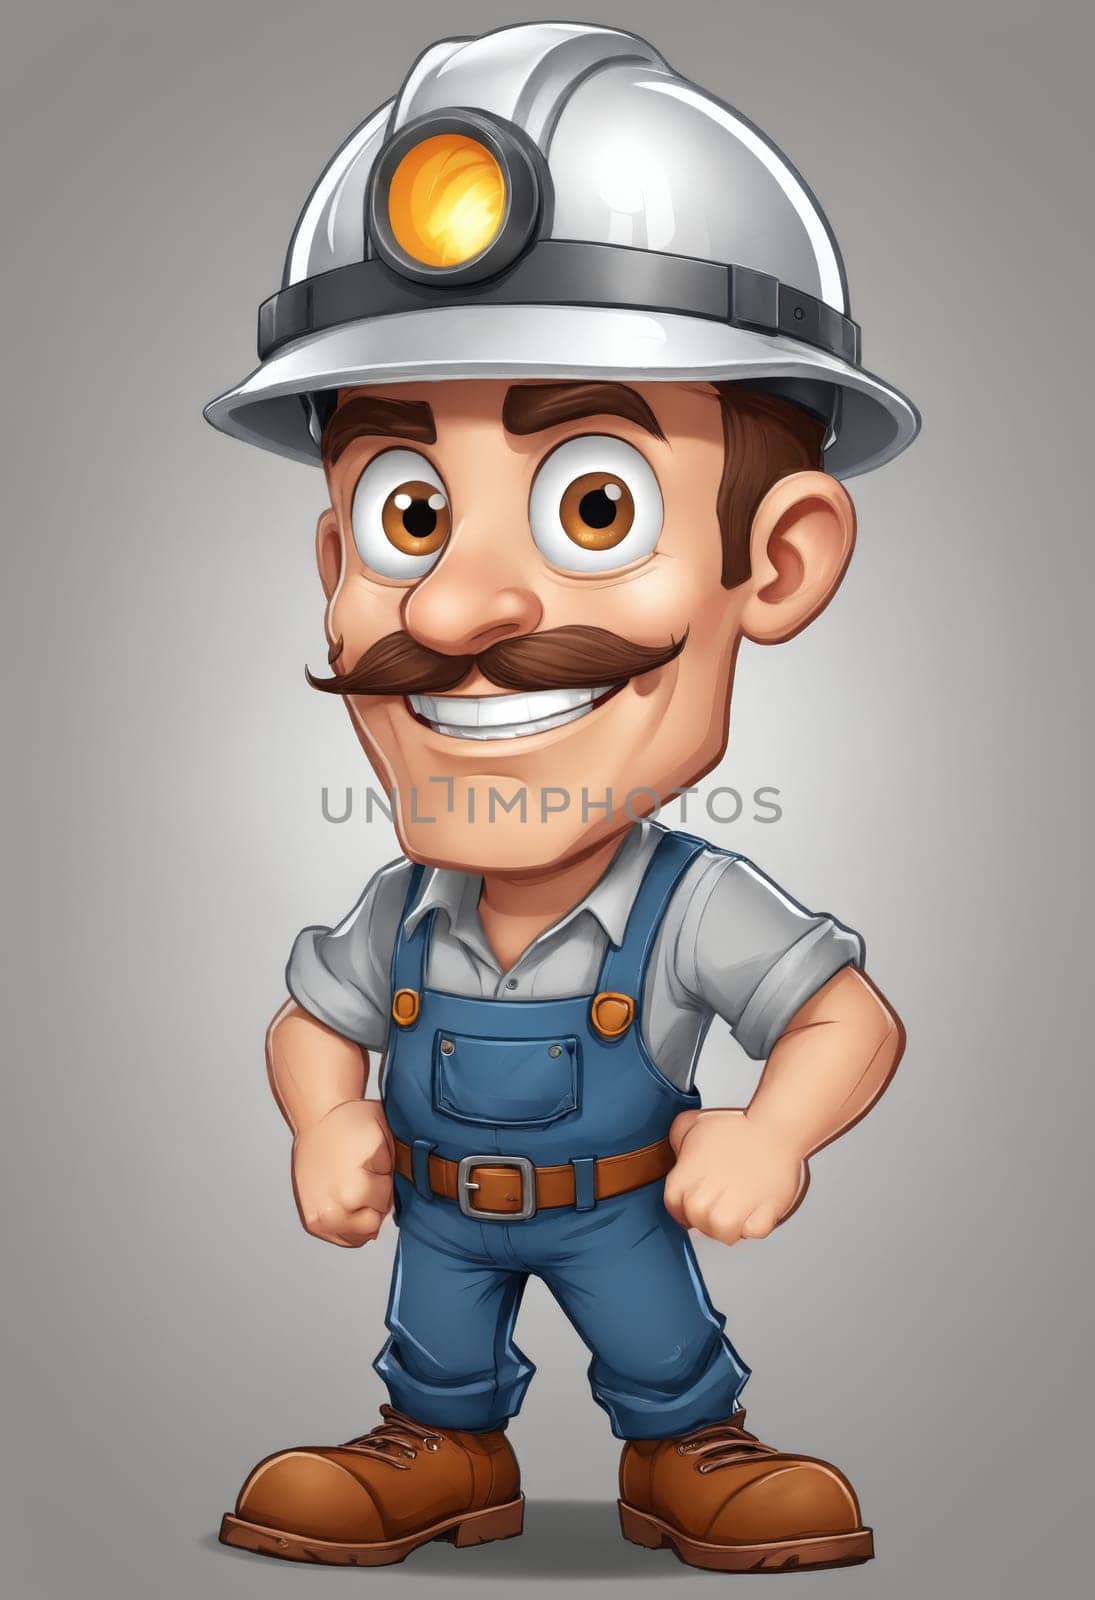 Safety First: Illustrated Miner with Lamp and Protective Attire by Andre1ns